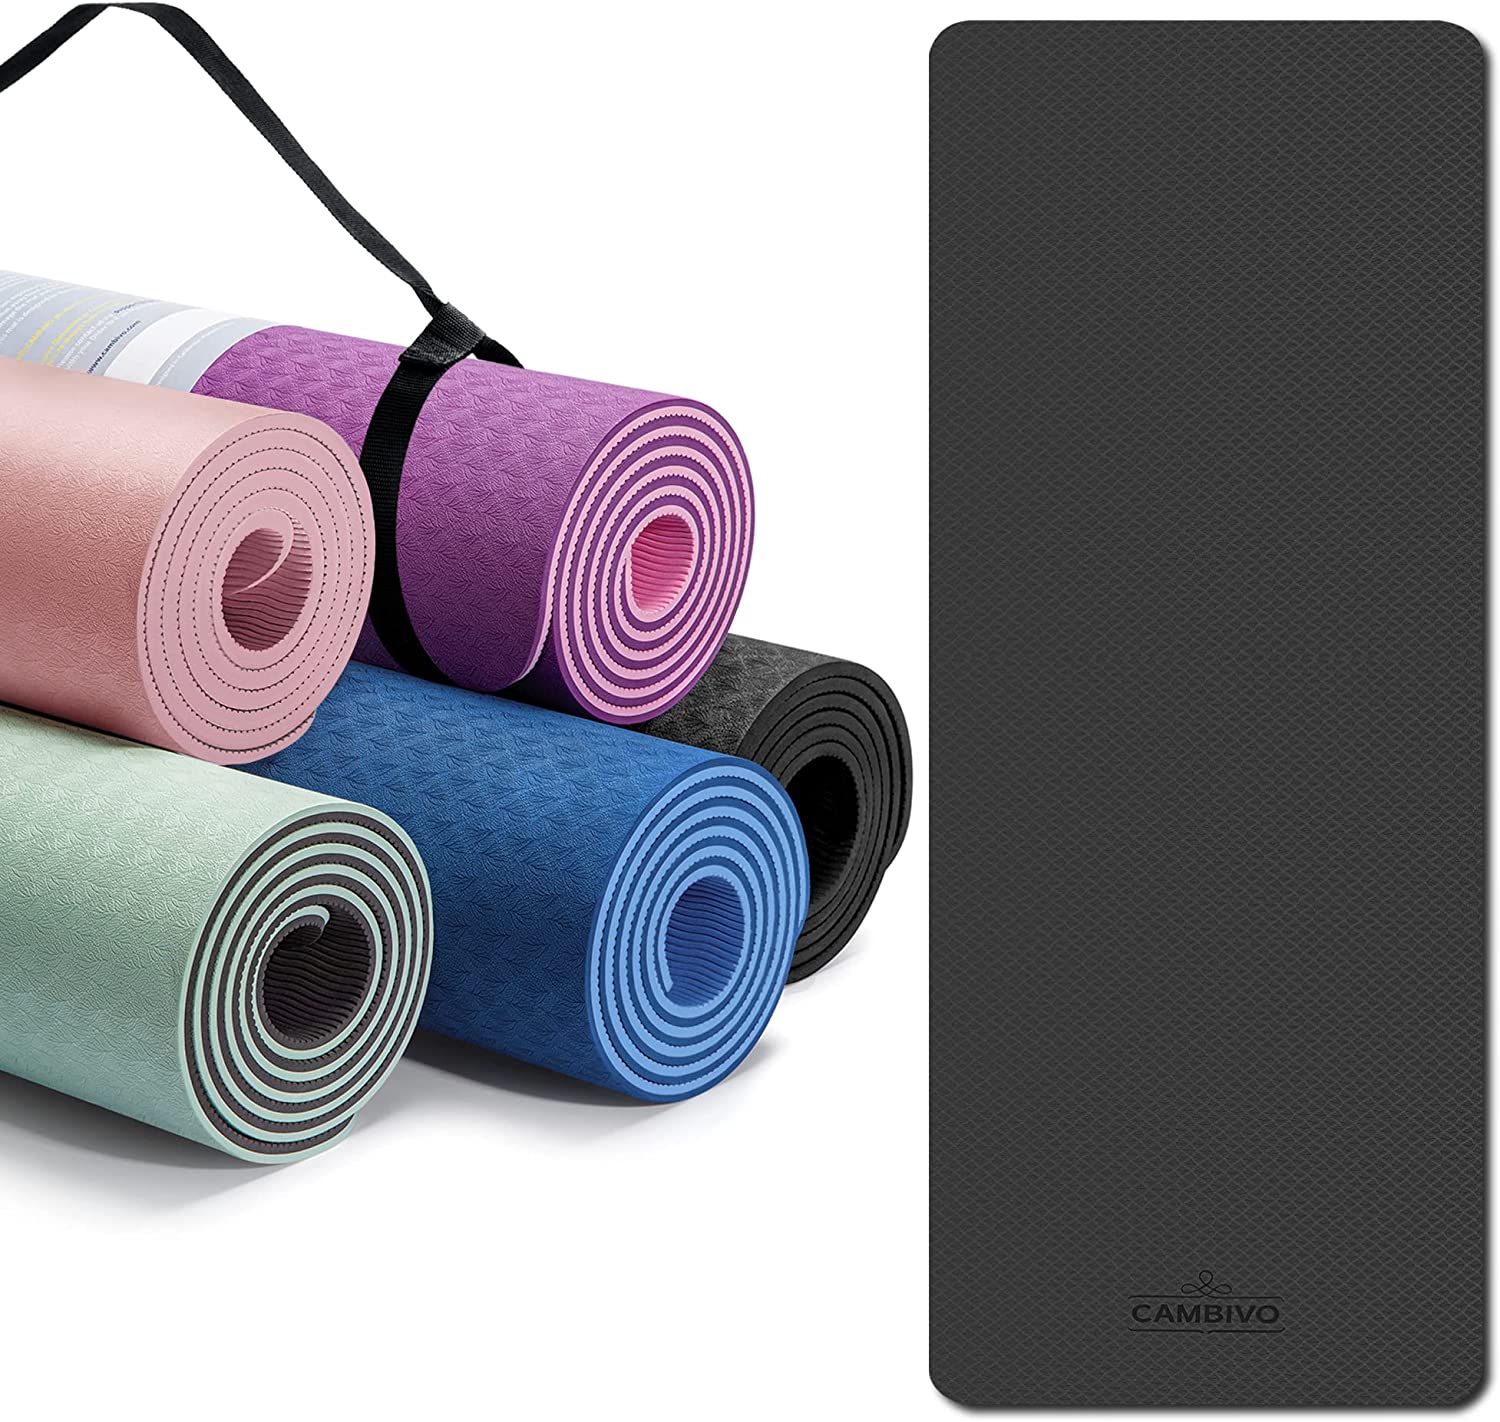 Beginner Non-Slip TPE Yoga Mat, 1830x580x6mm, Double-Layer Environmental  Protection, Gymnastics And Pilates Fitness Exercise Mat